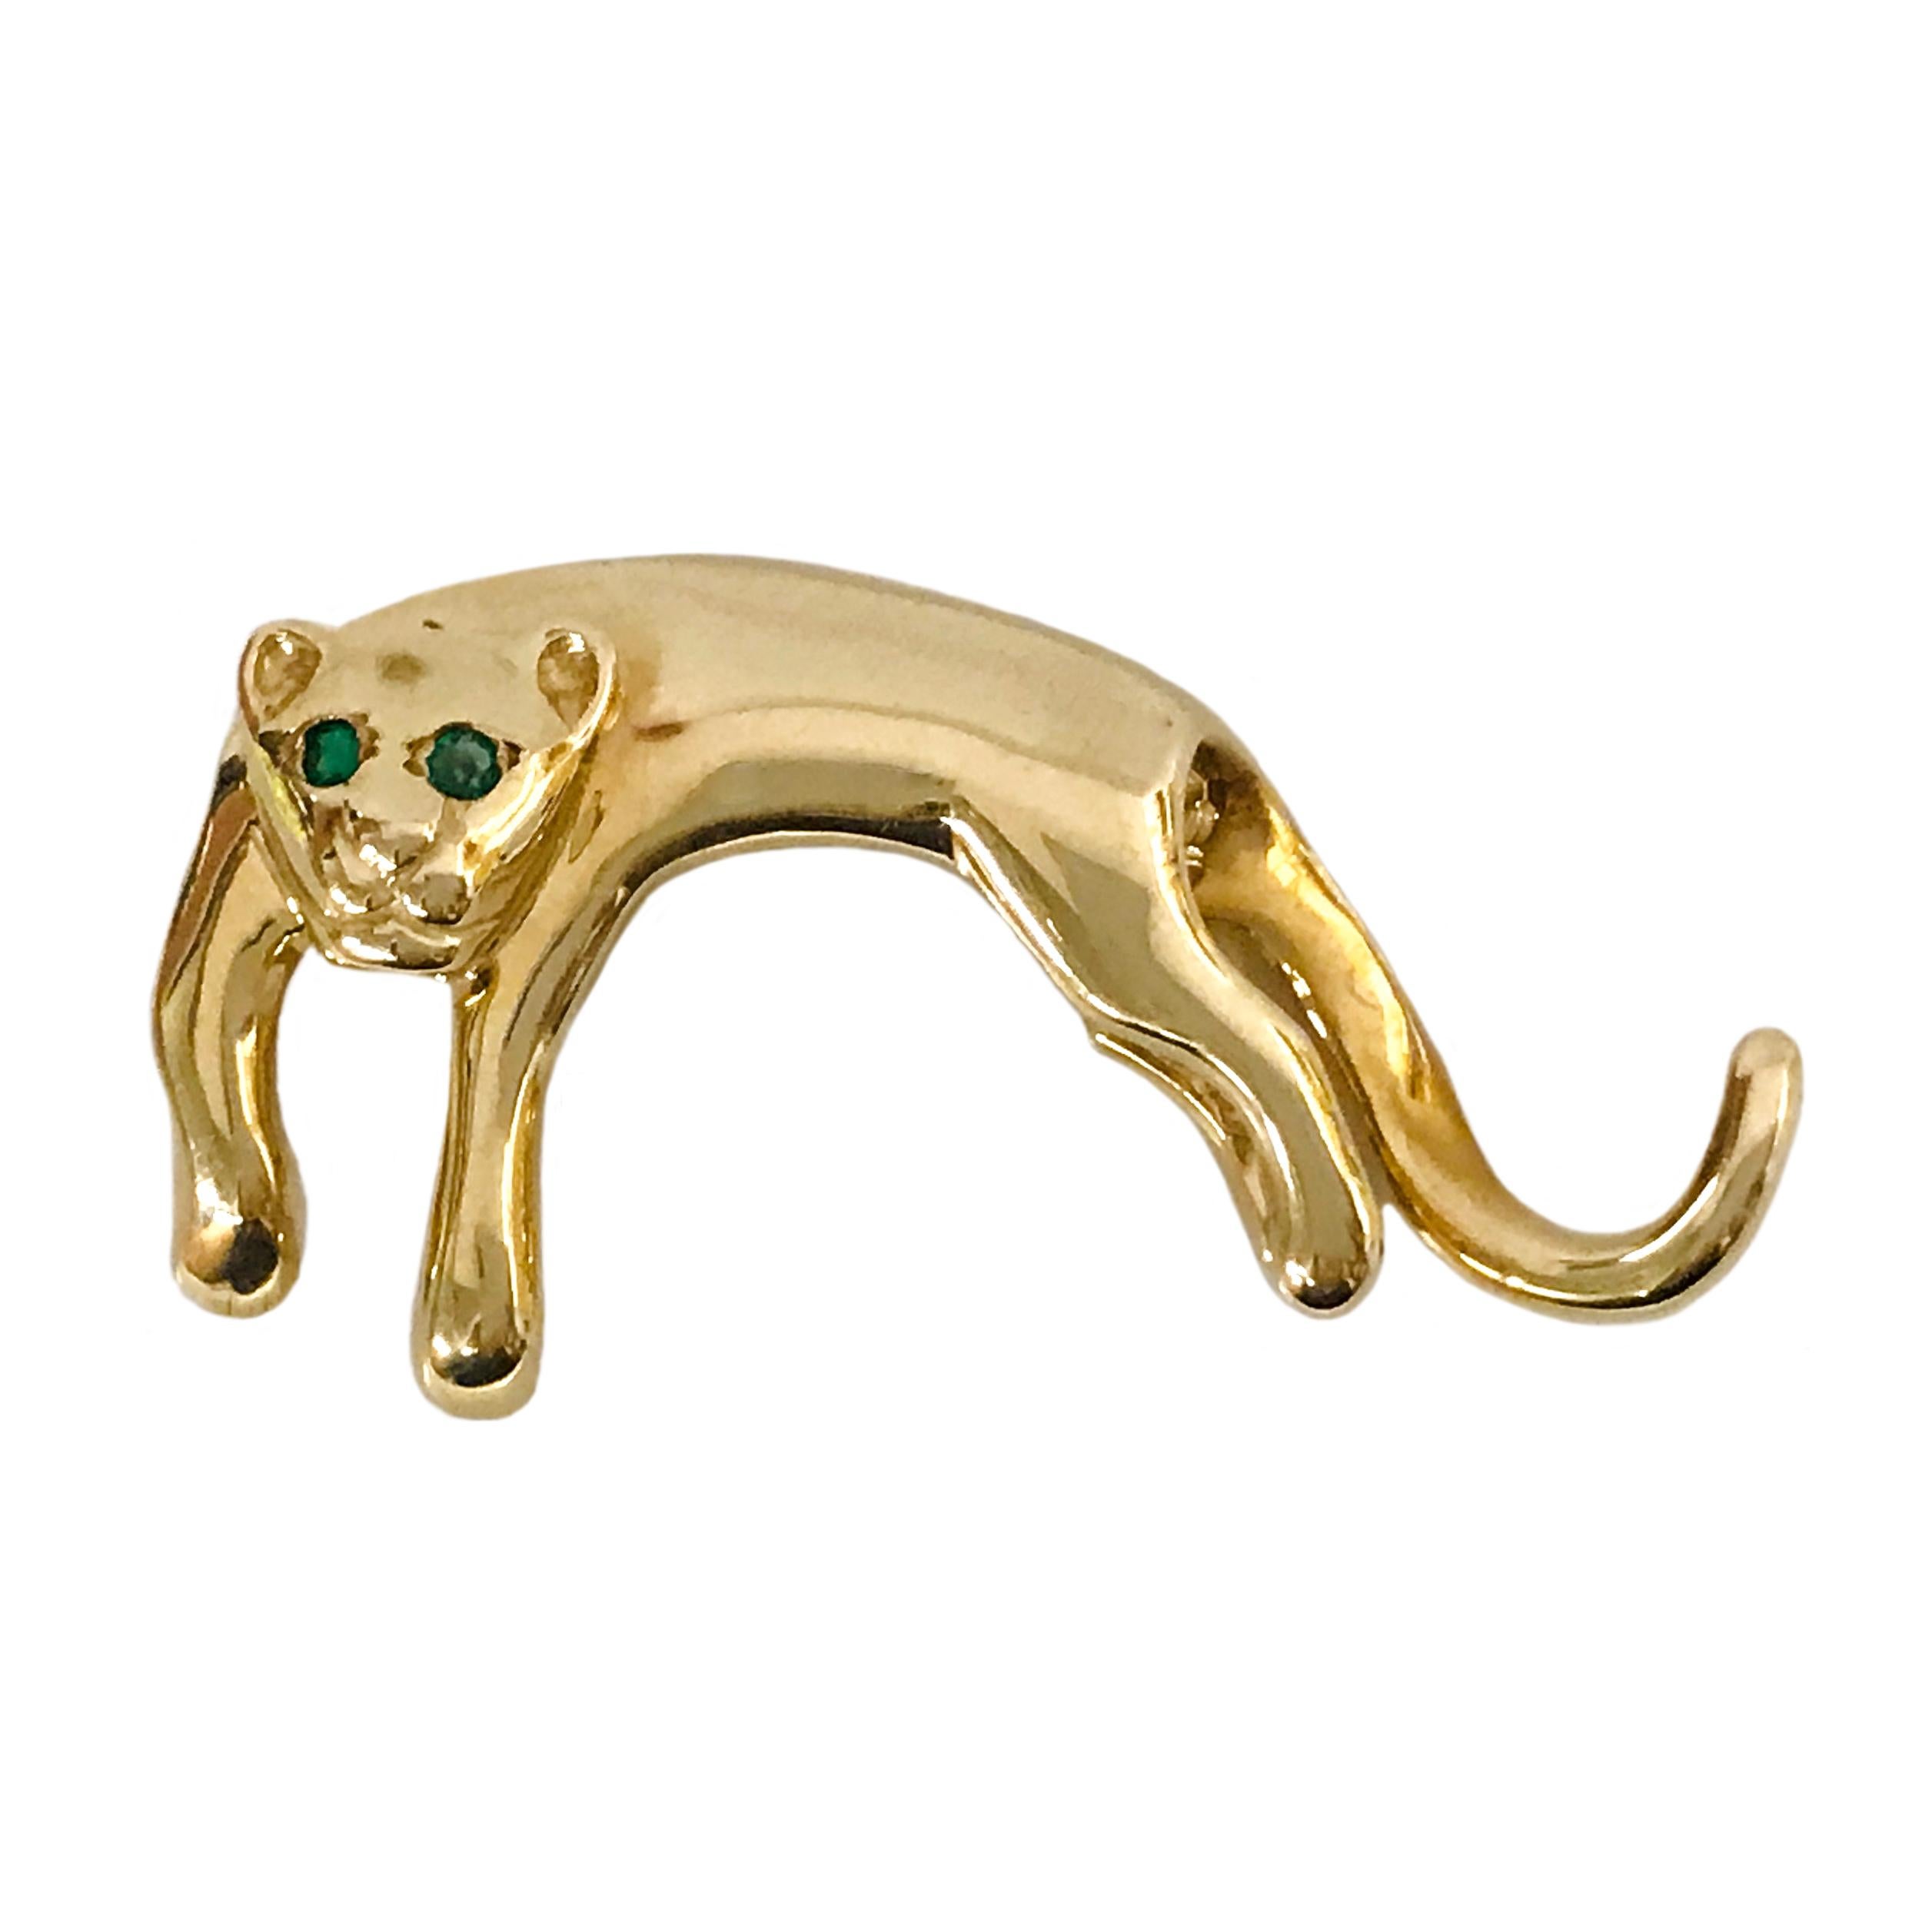 14 Karat Emerald Panther Slide Pendant. This big cat will slide into a necklace or bracelet and go with you anywhere. An Emerald is flush-set in each eye for added detail. The pendant measures 34.6mm wide x 18.5mm tall. 14K and the Italian star. The